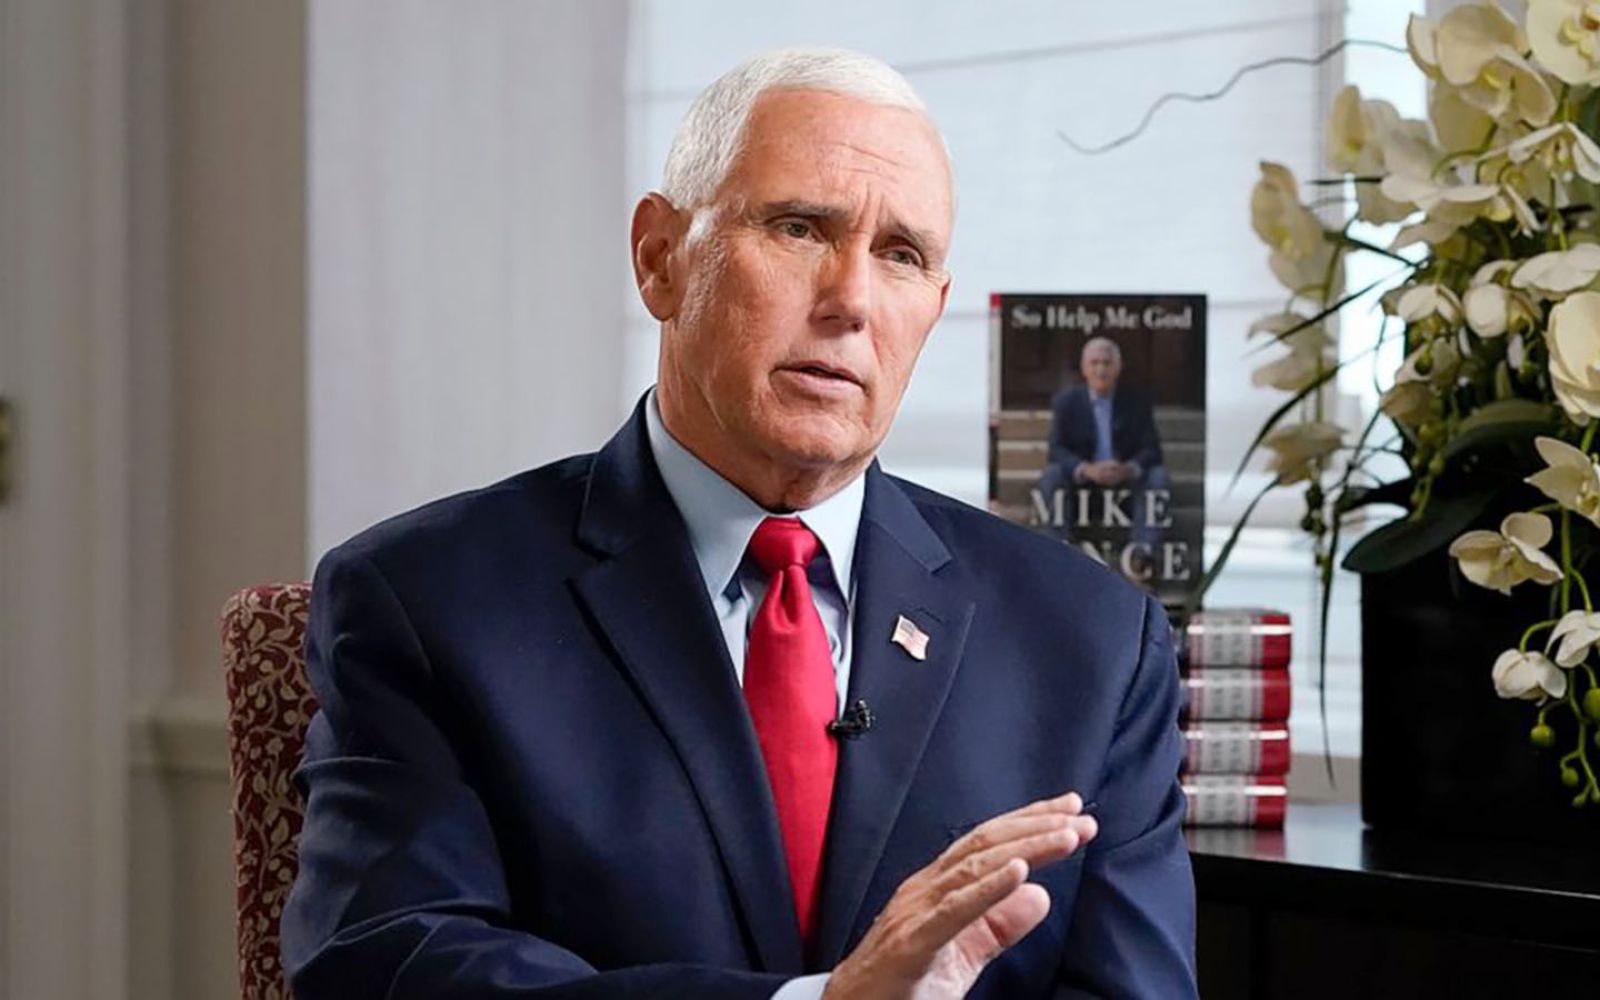 Mike Pence will be at The Clyde on Dec. 21 to sign copies of his book.